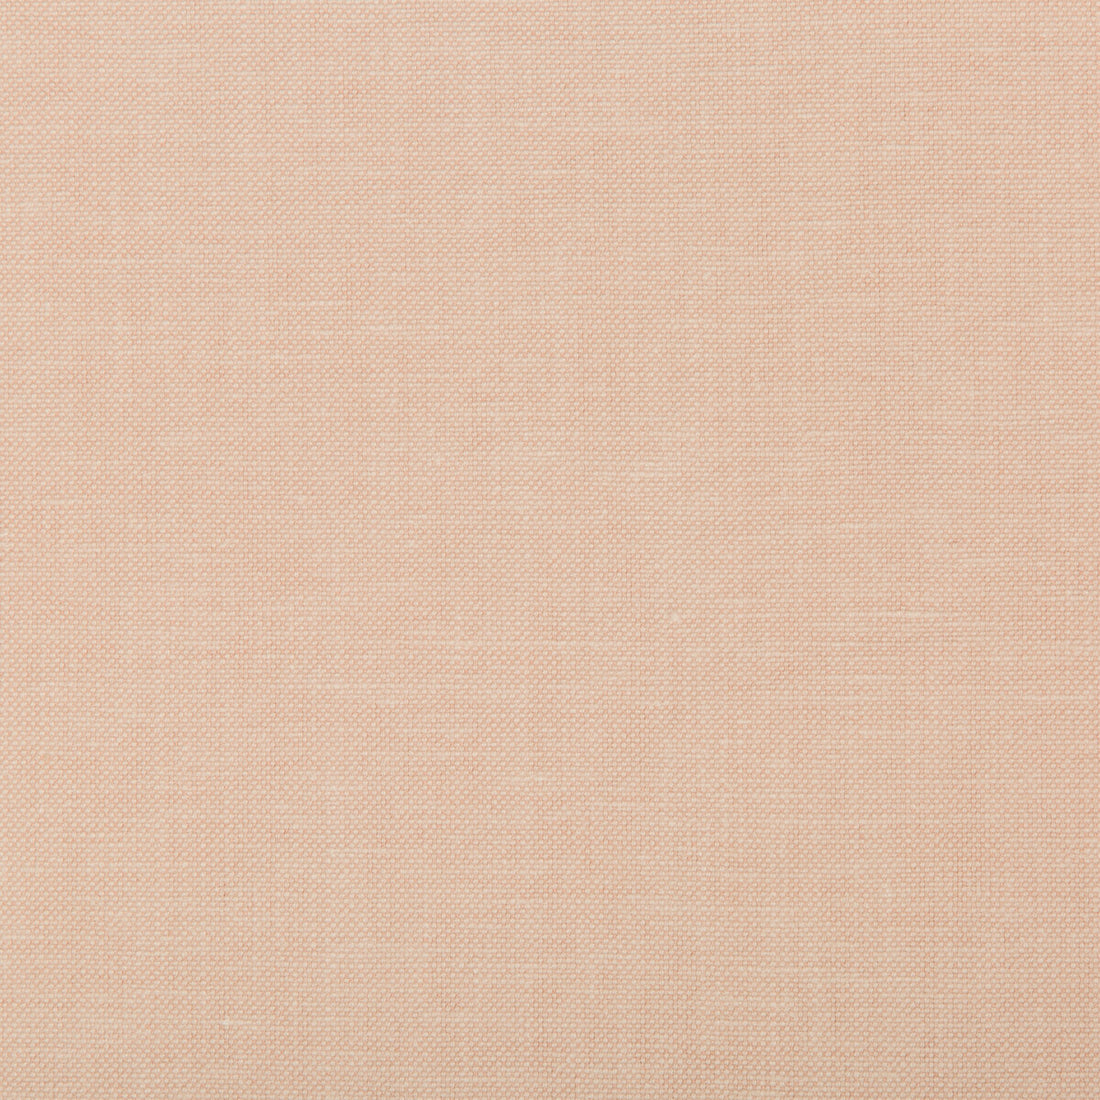 Oxfordian fabric in blush color - pattern 35543.17.0 - by Kravet Basics in the Bermuda collection